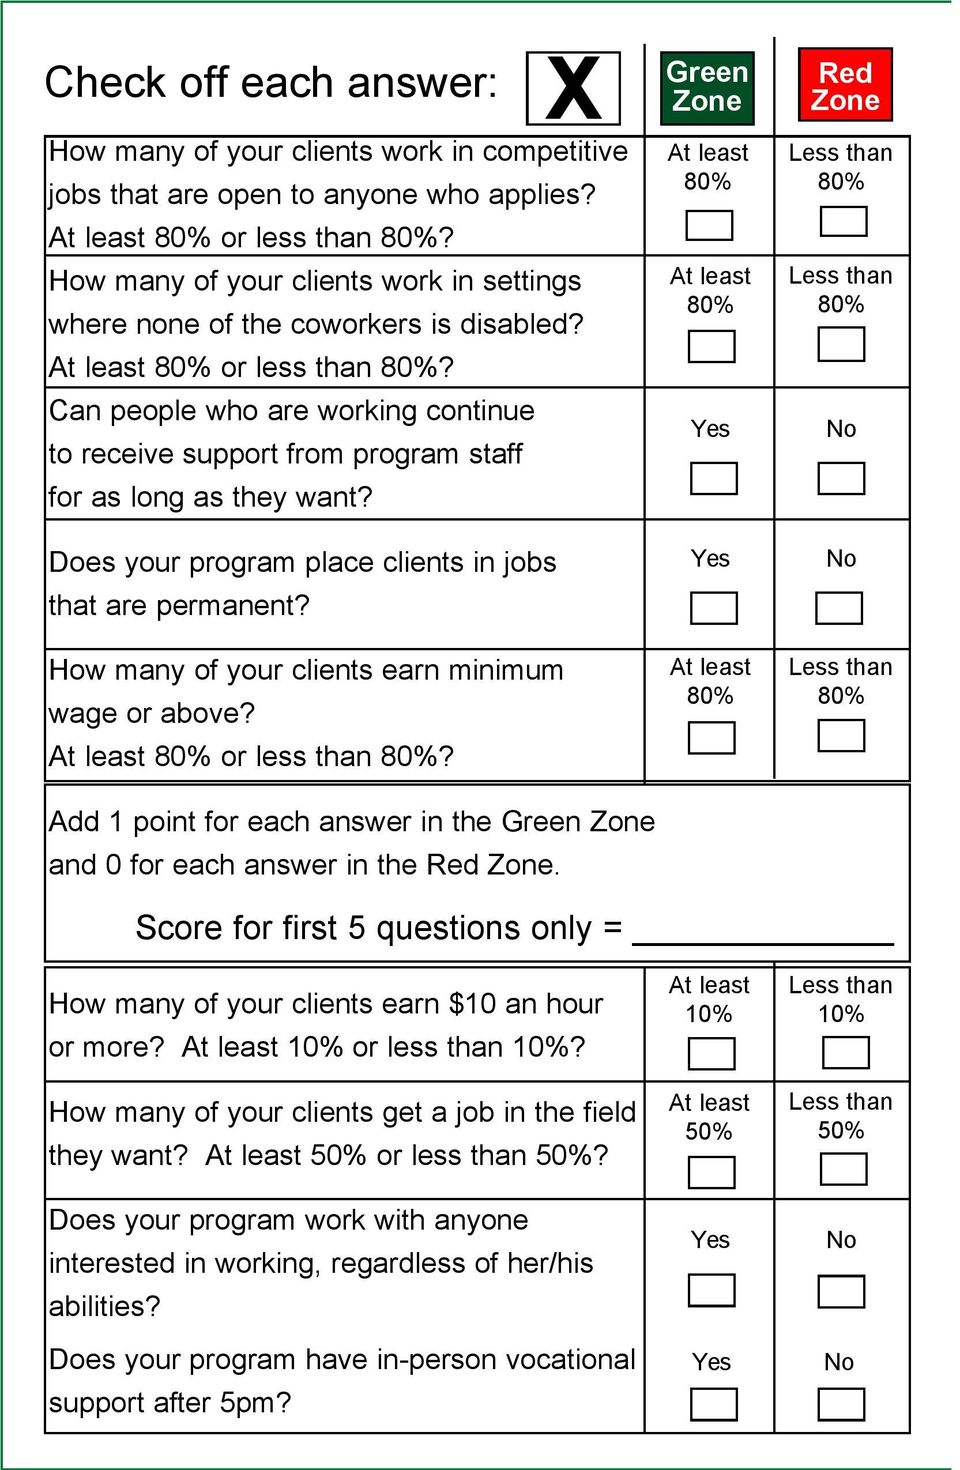 Can people who are working continue to receive support from program staff for as long as they want? Does your program place clients in jobs that are permanent?